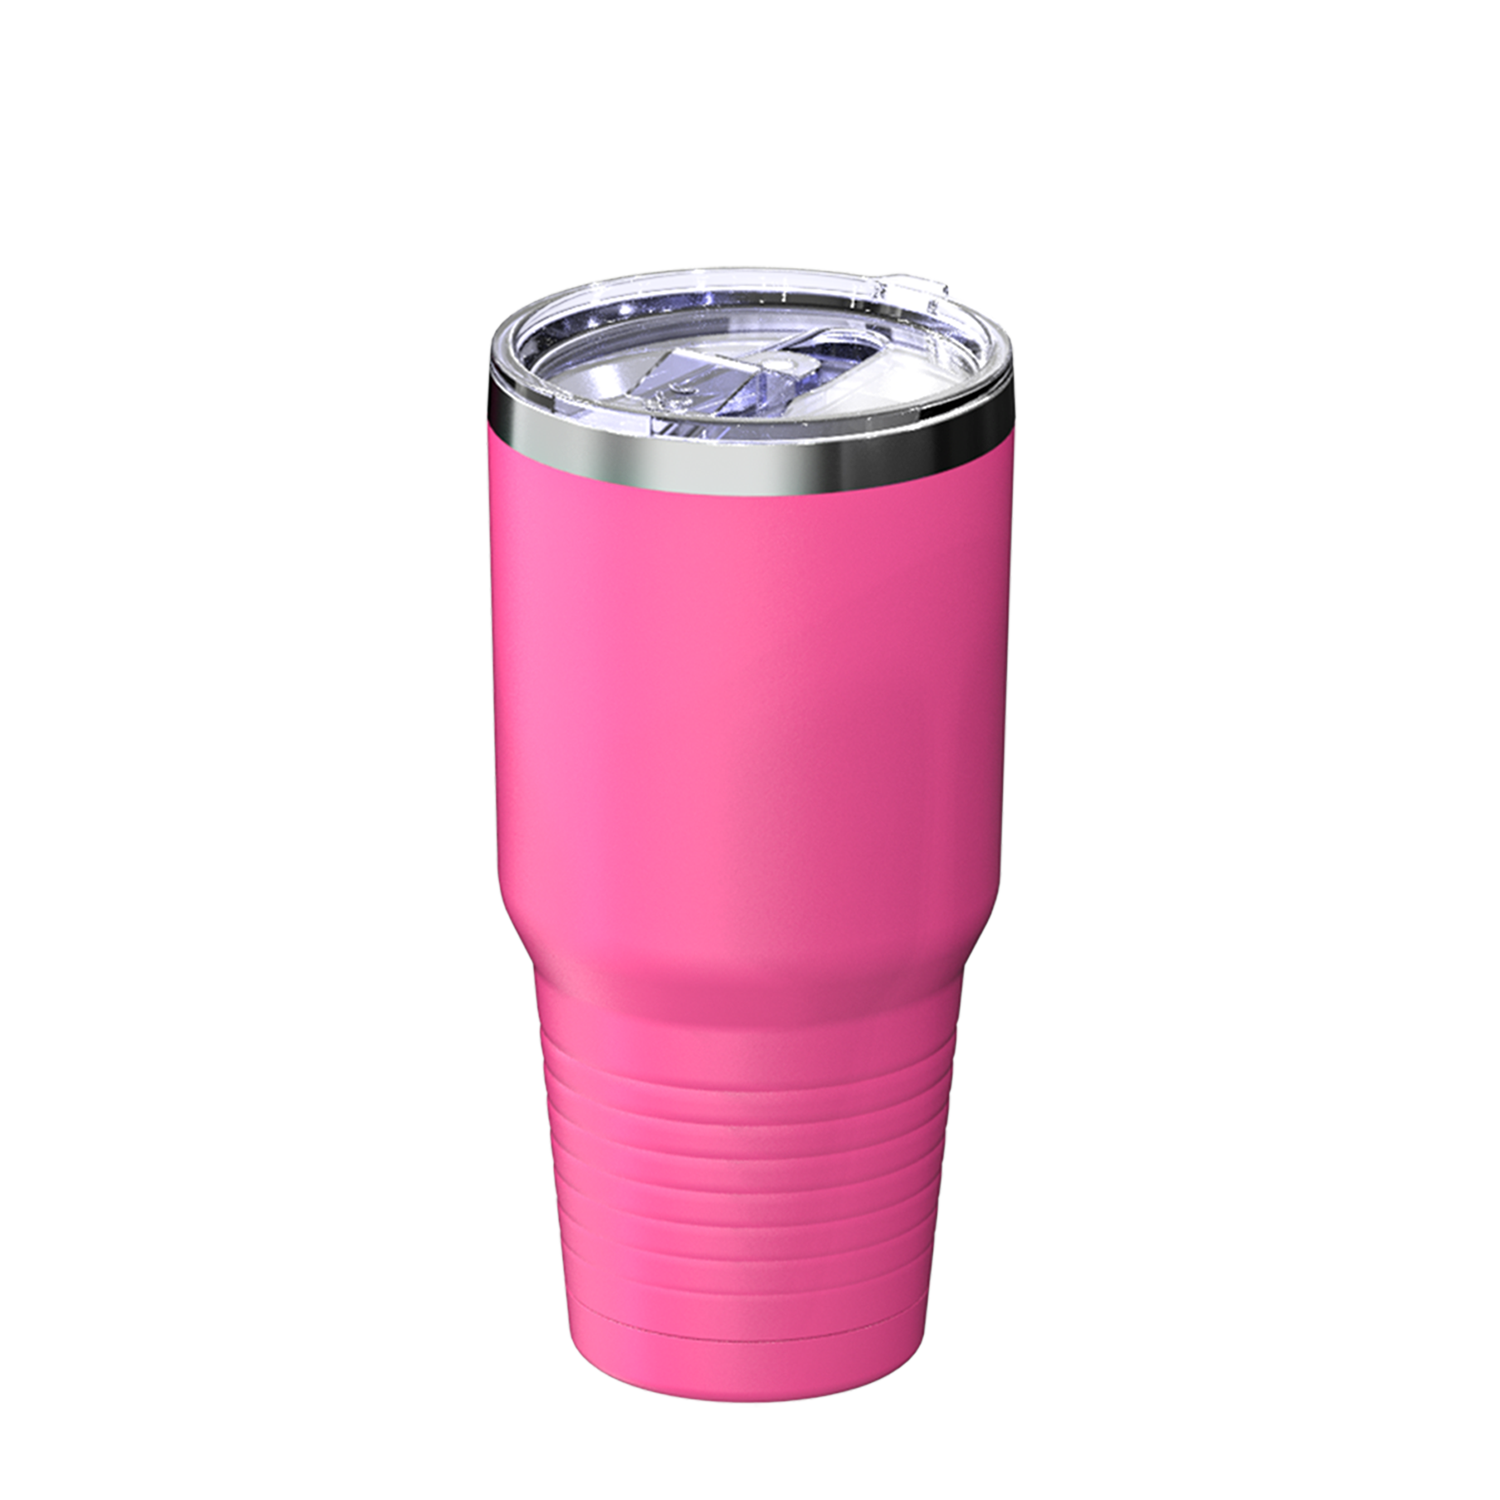 30 oz. Insulated Travel Mug Cup with Lid